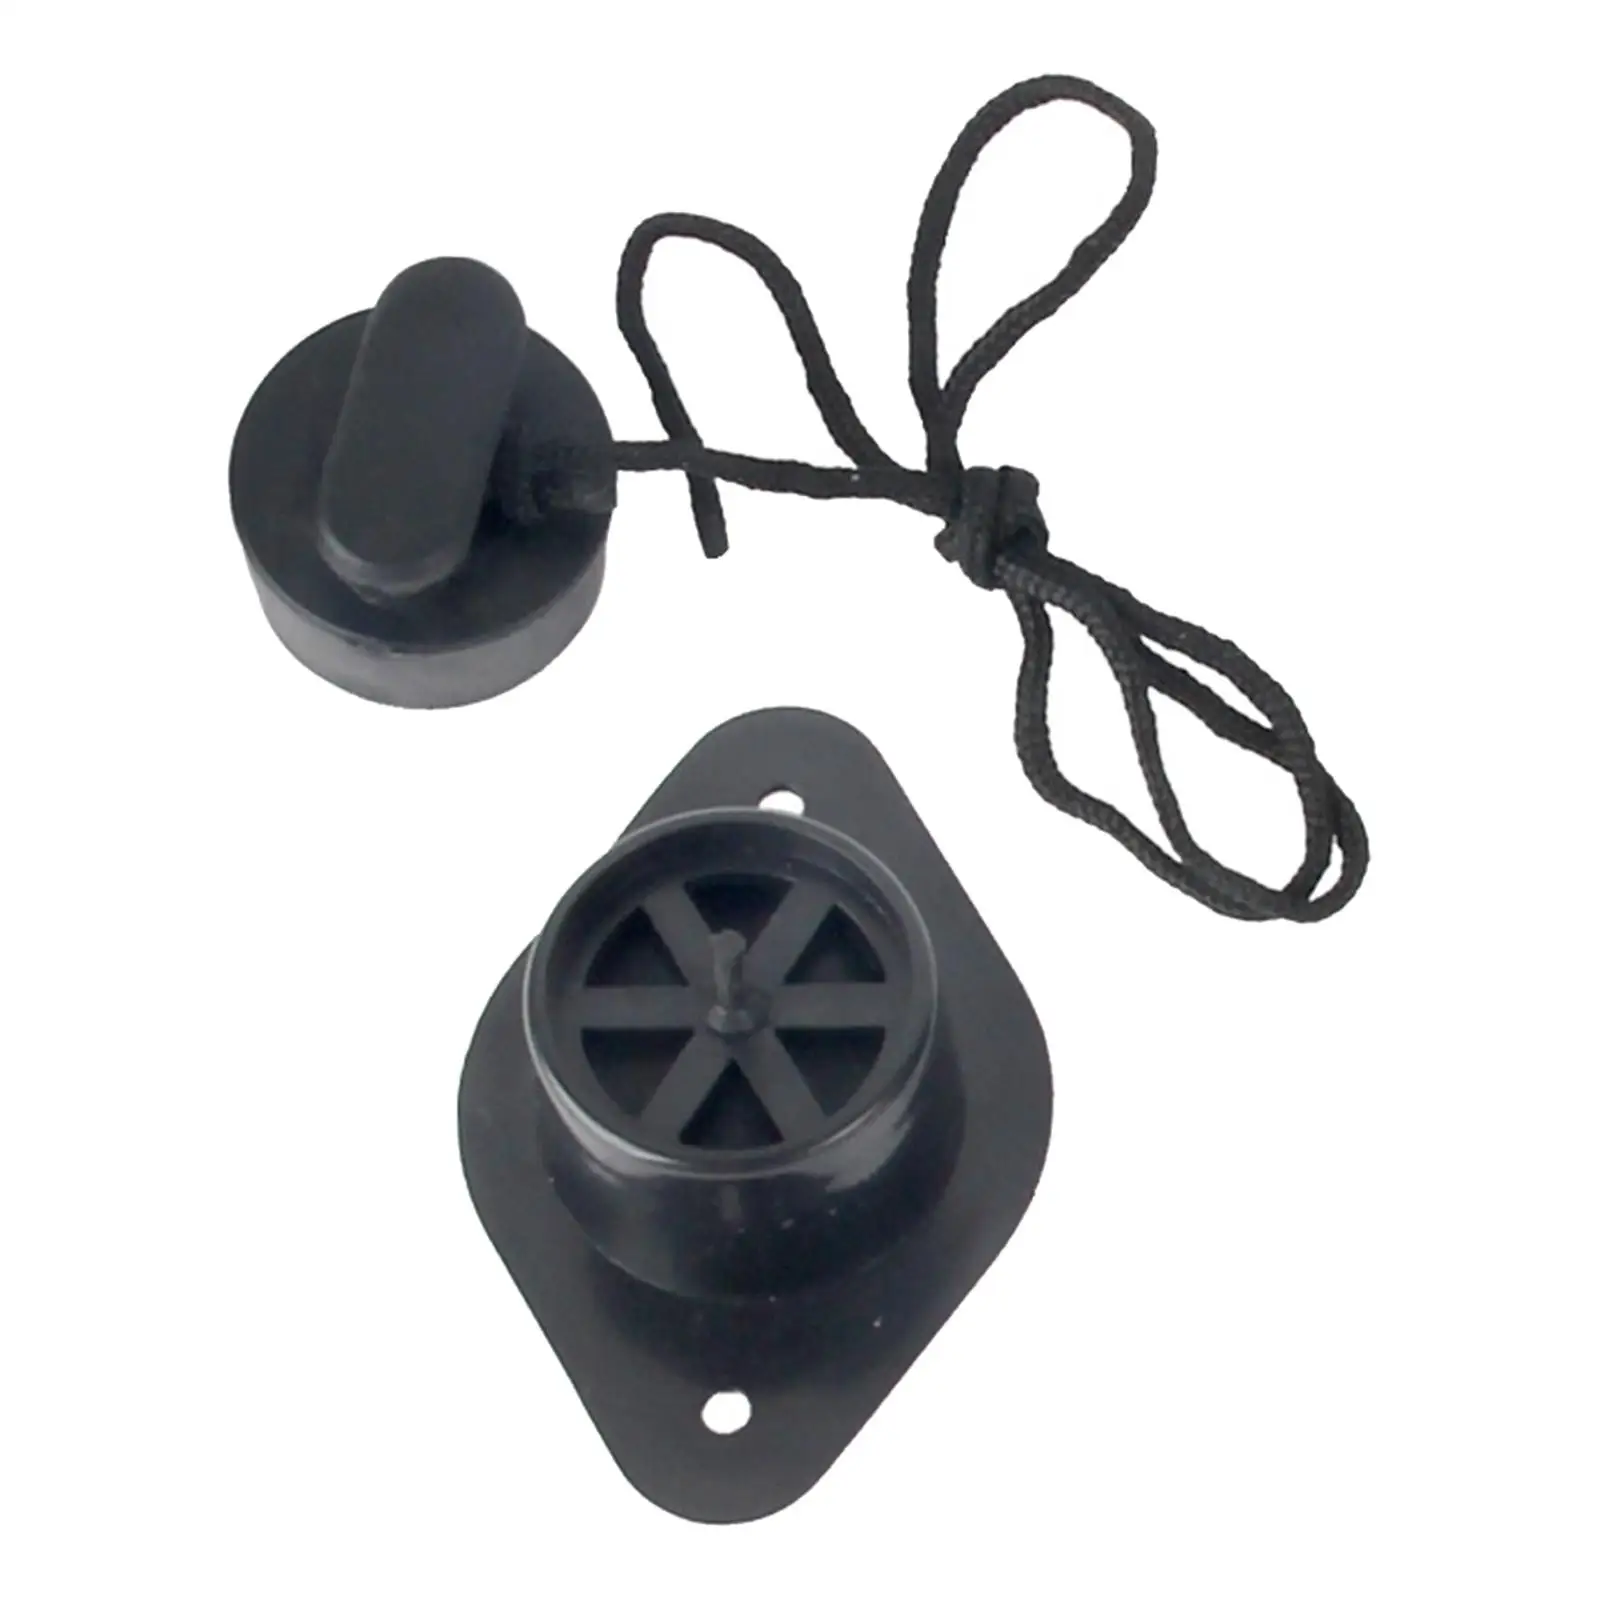 Inflatable Boat Drain Valve Black Airbeds with A Pull Cord Sturdy Easy to Operate Portable Rowing Boats Accessories Replacement